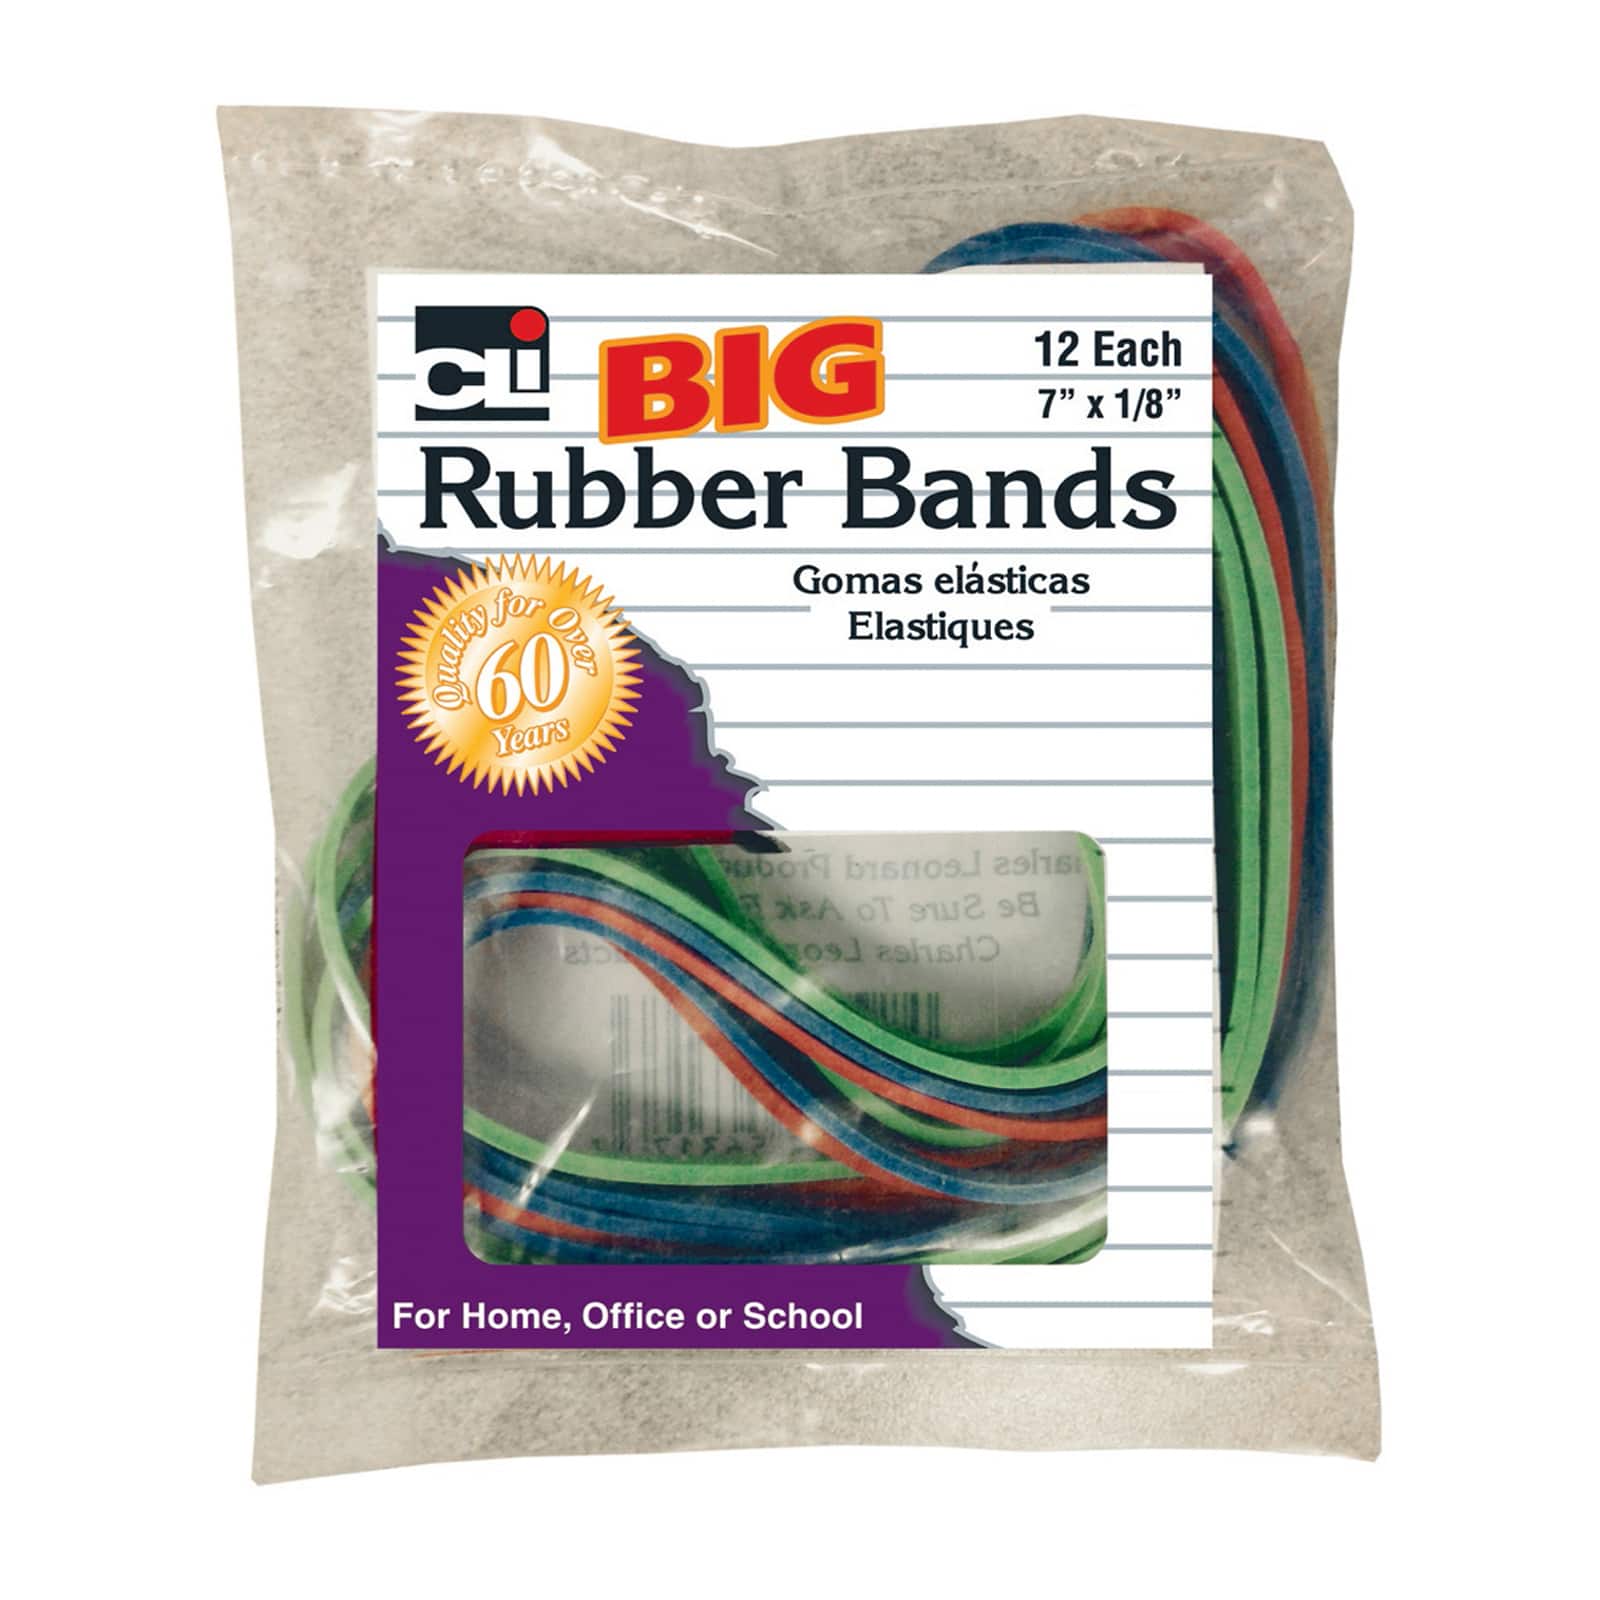 where to get big rubber bands